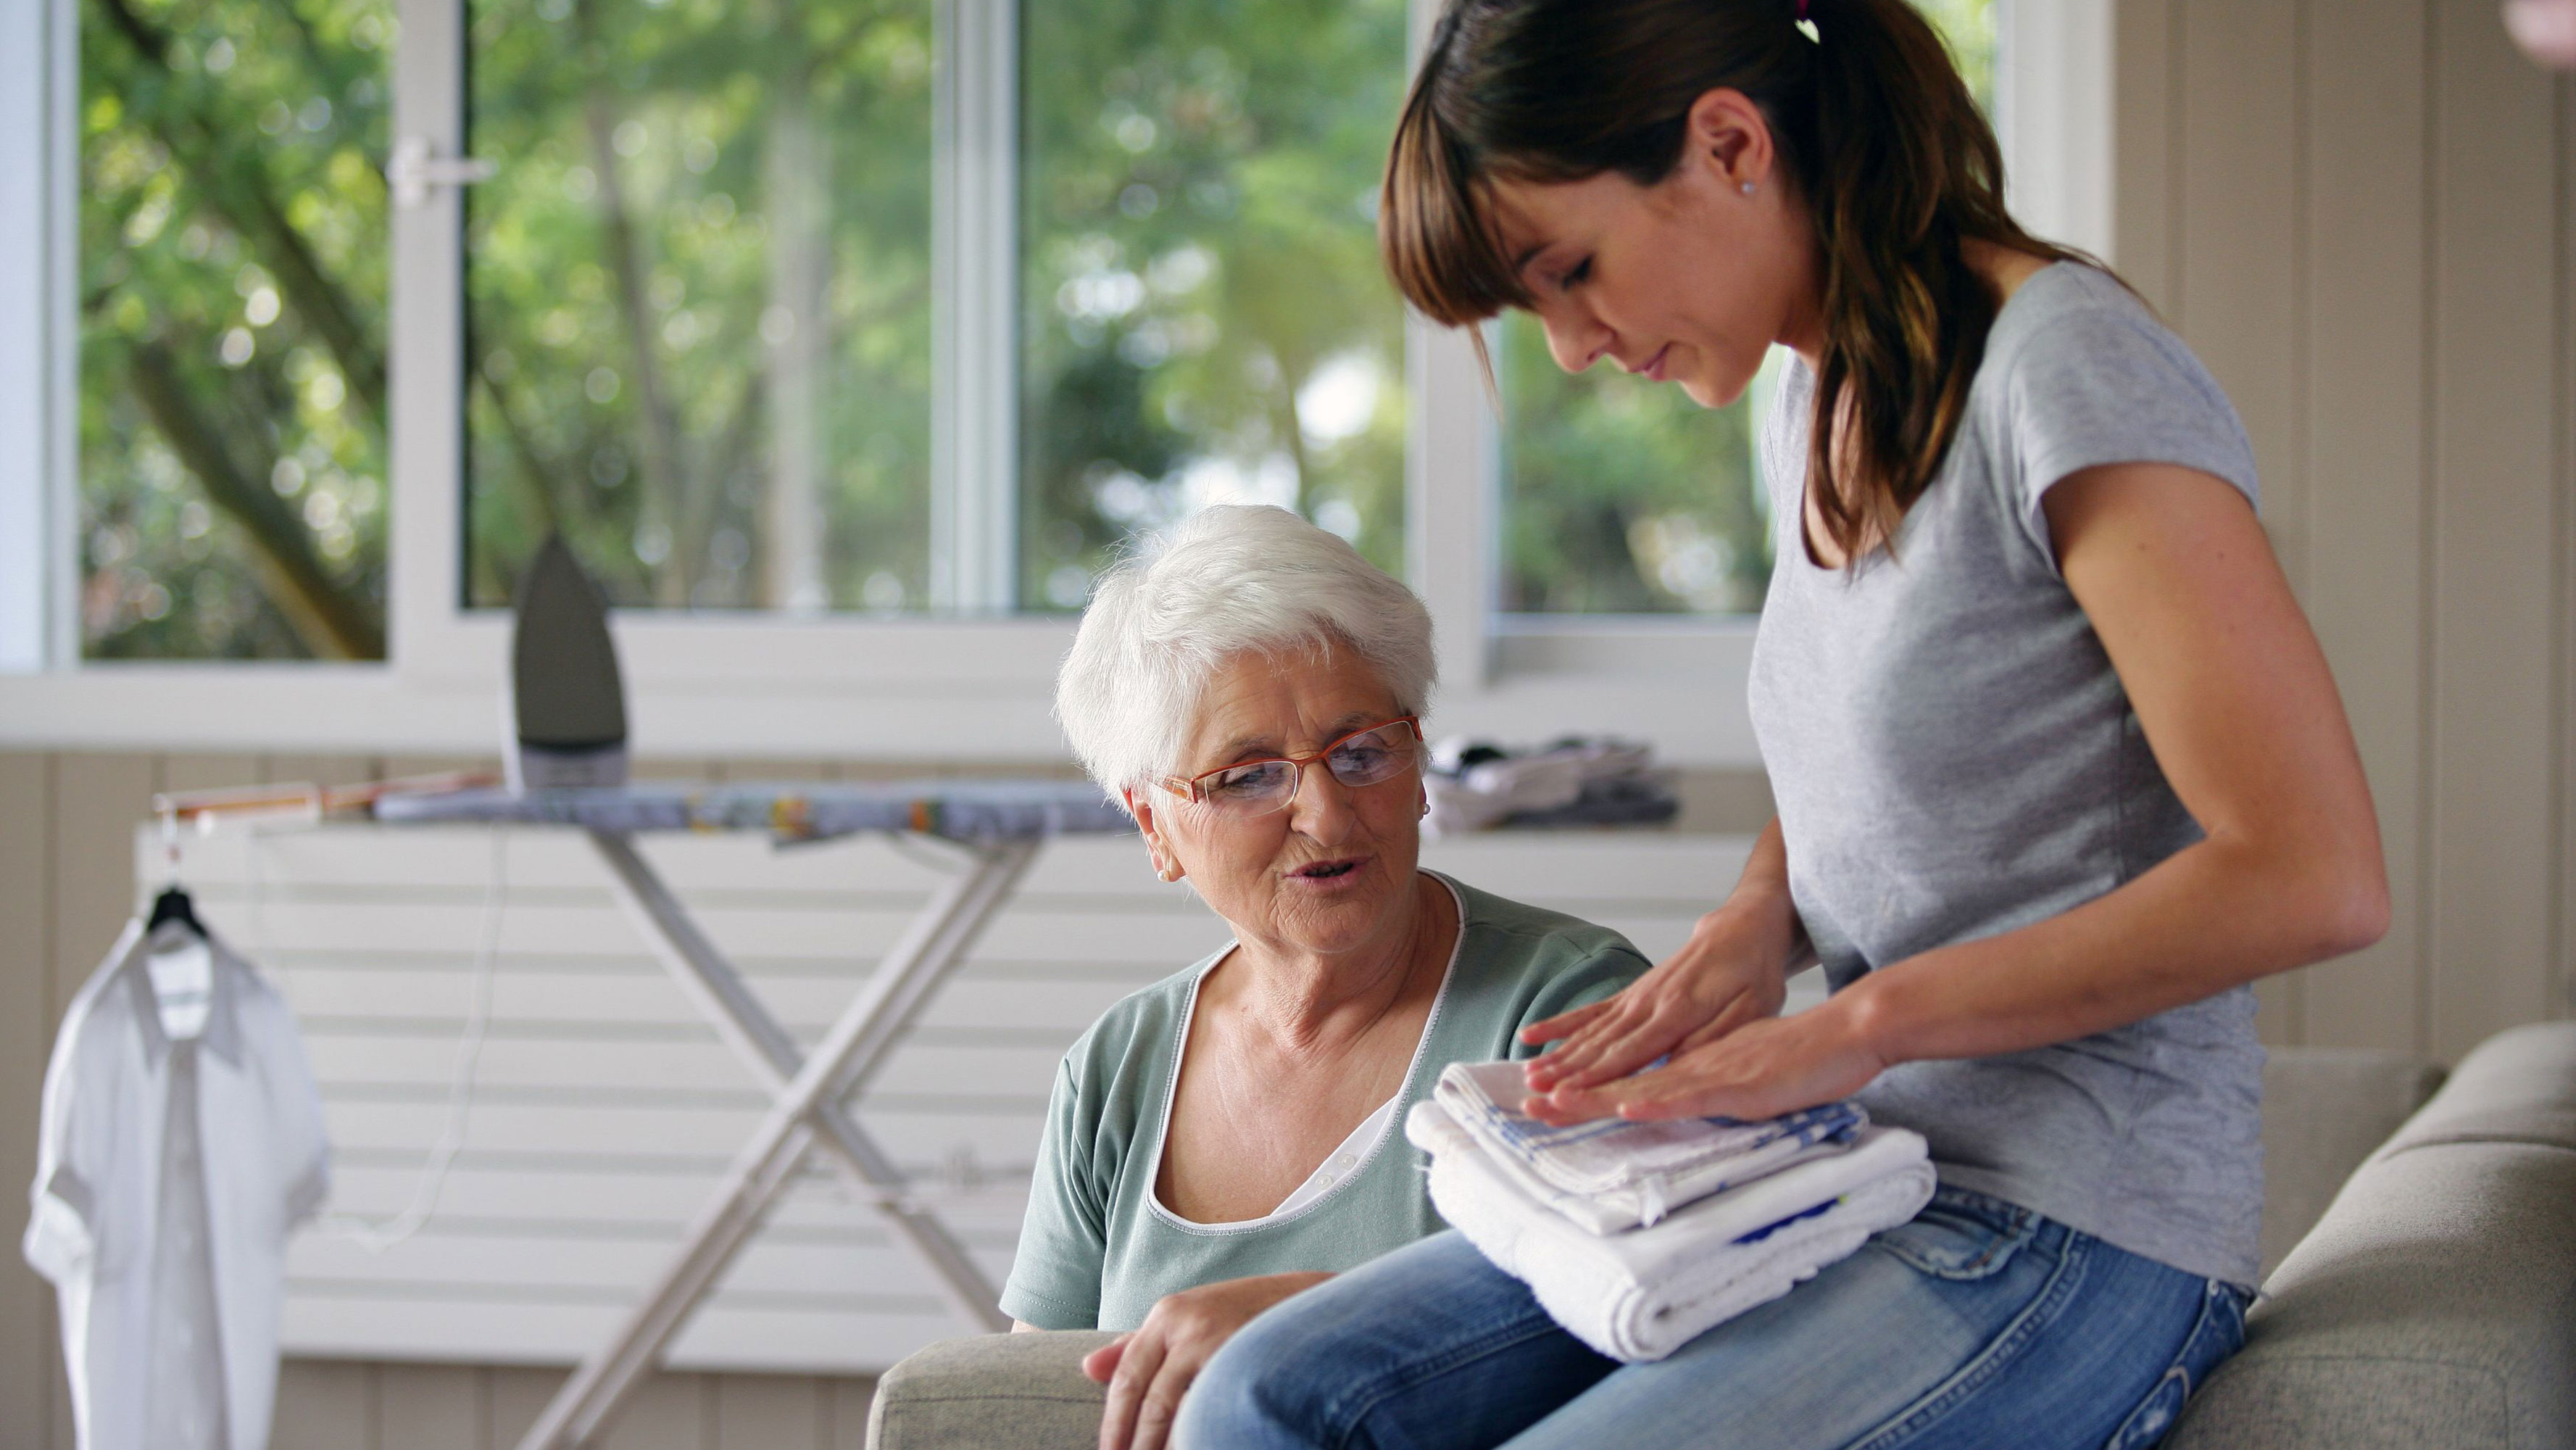 An elderly woman chats with a young woman folding towels.